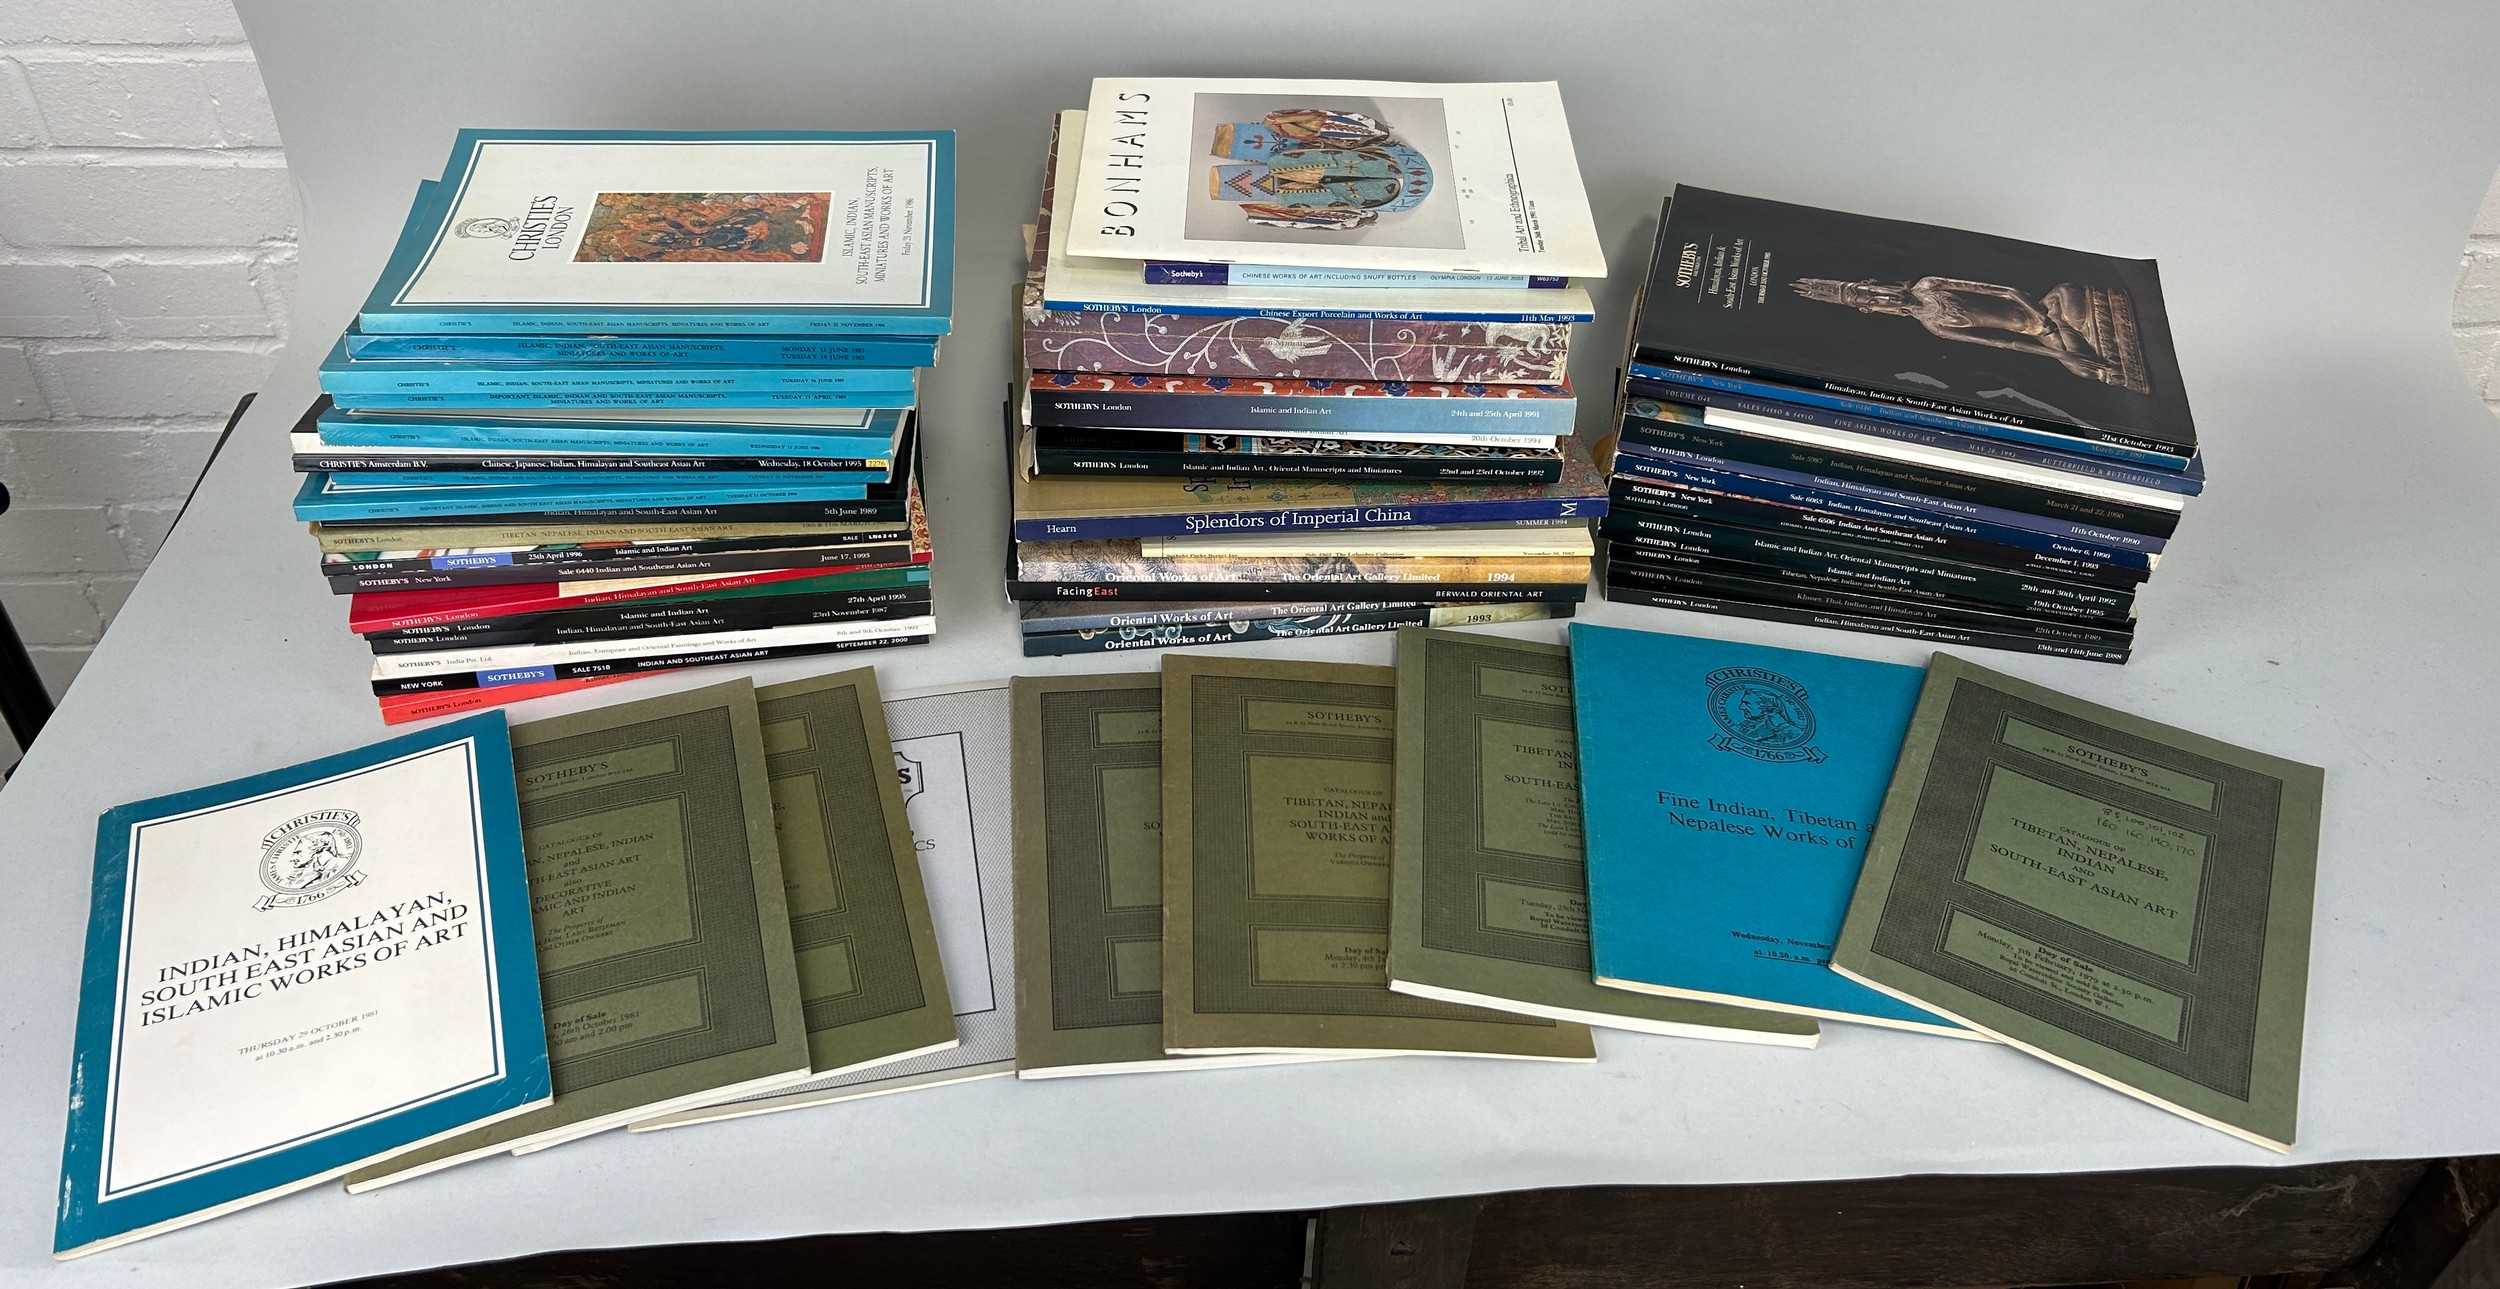 A LARGE COLLECTION OF ASIAN ART CATALOGUES FROM SOTHEBY'S, CHRISTIES, SPINK AND OTHER AUCTION HOUSES